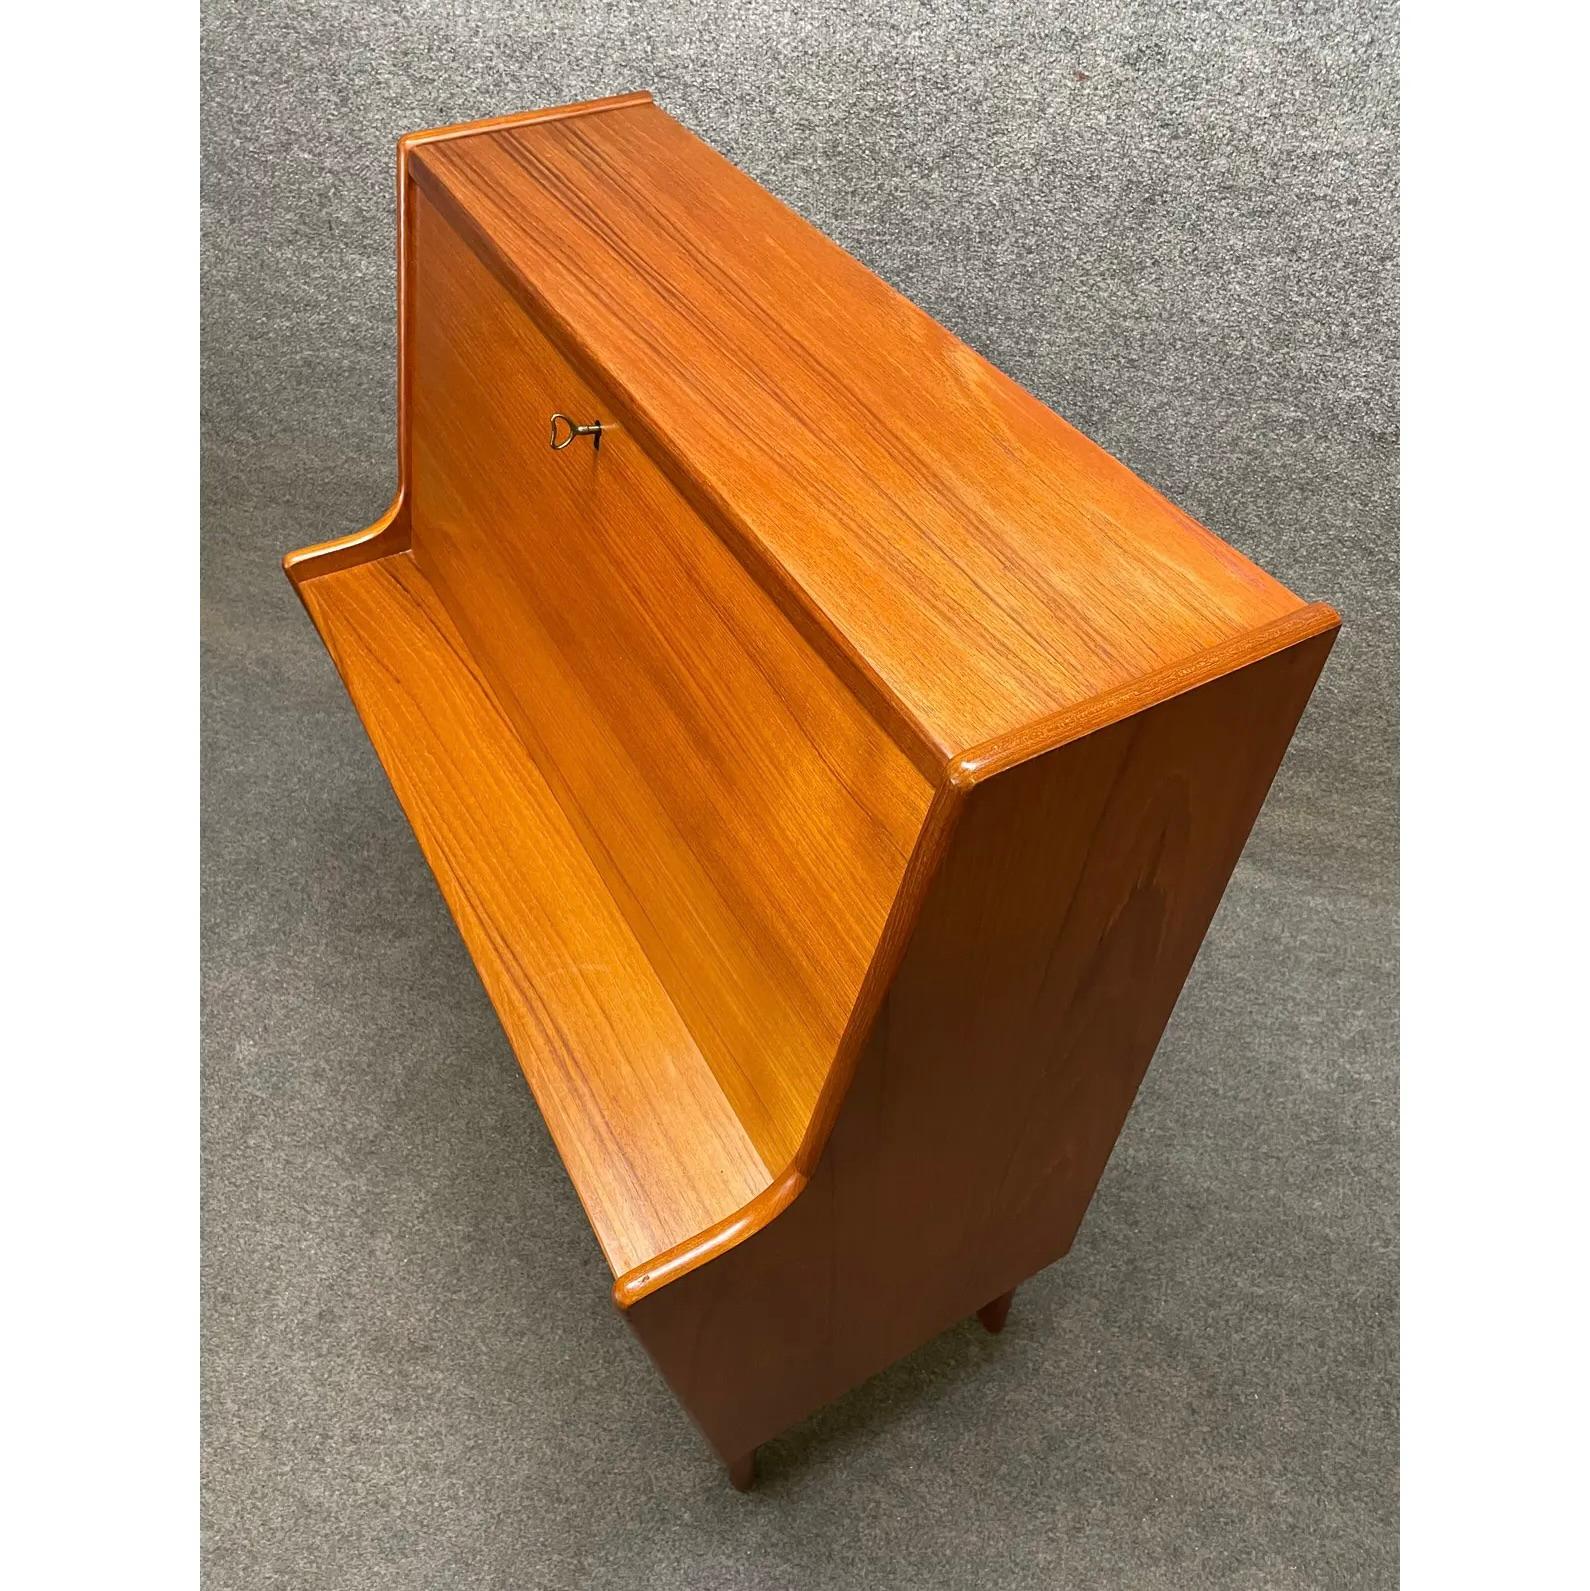 Here is a beautiful and sought after scandinavian modern secretary desk designed by Arne Wahl Iversen and manufactured by Vinde Mobelfabrik in Denmark in the 1960s. This exquisite case piece, recently imported from Europe to California before its